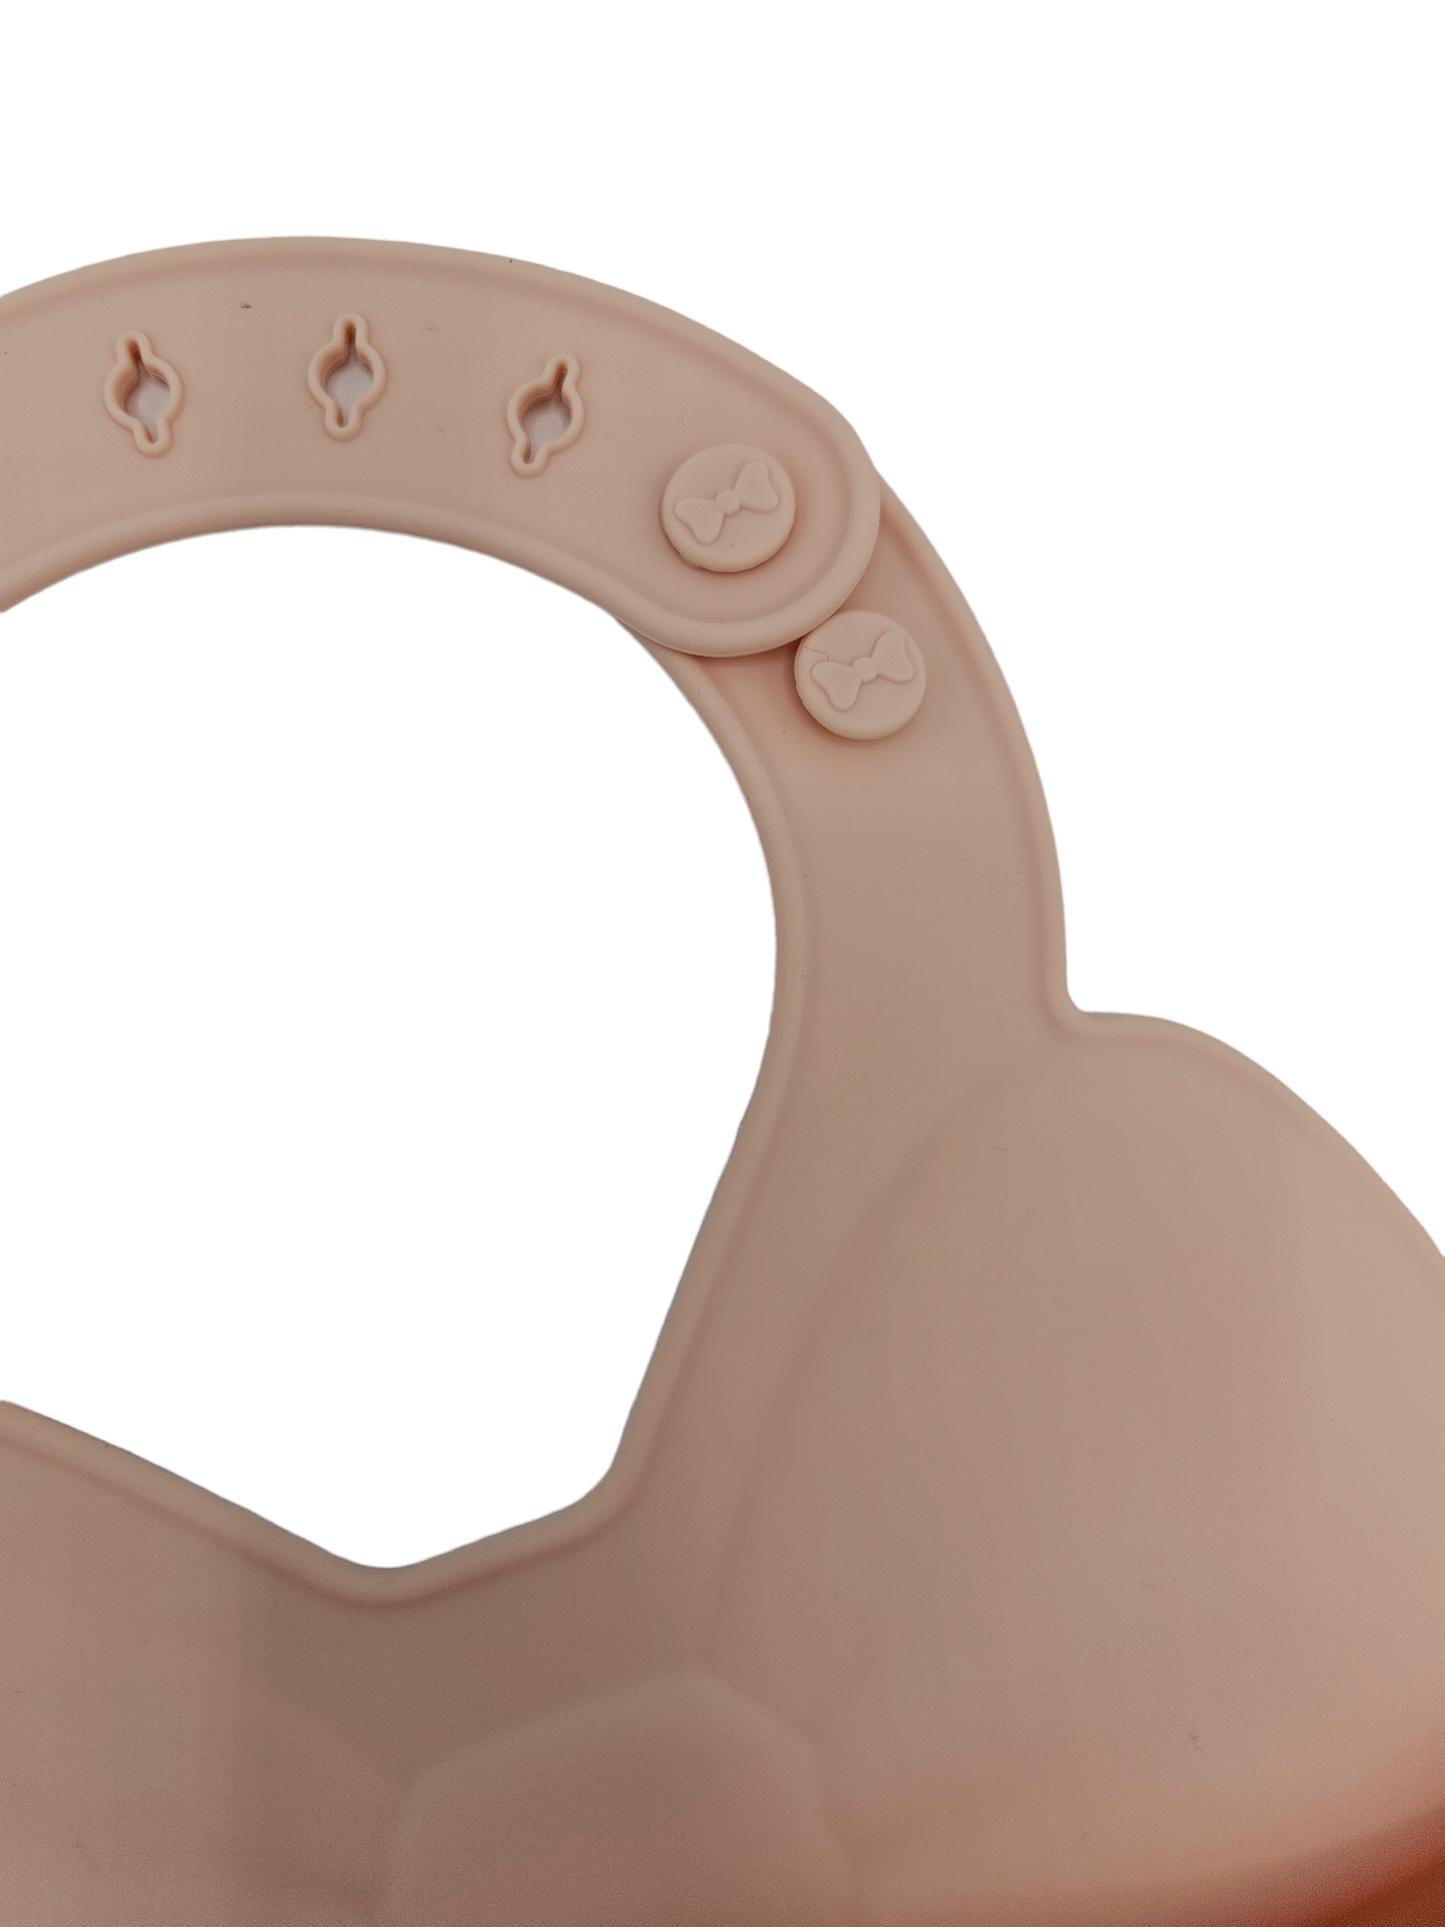 Light Pink Bow Design Adjustable Waterproof Silicone Weaning Bib - Betty Brown Boutique Ltd